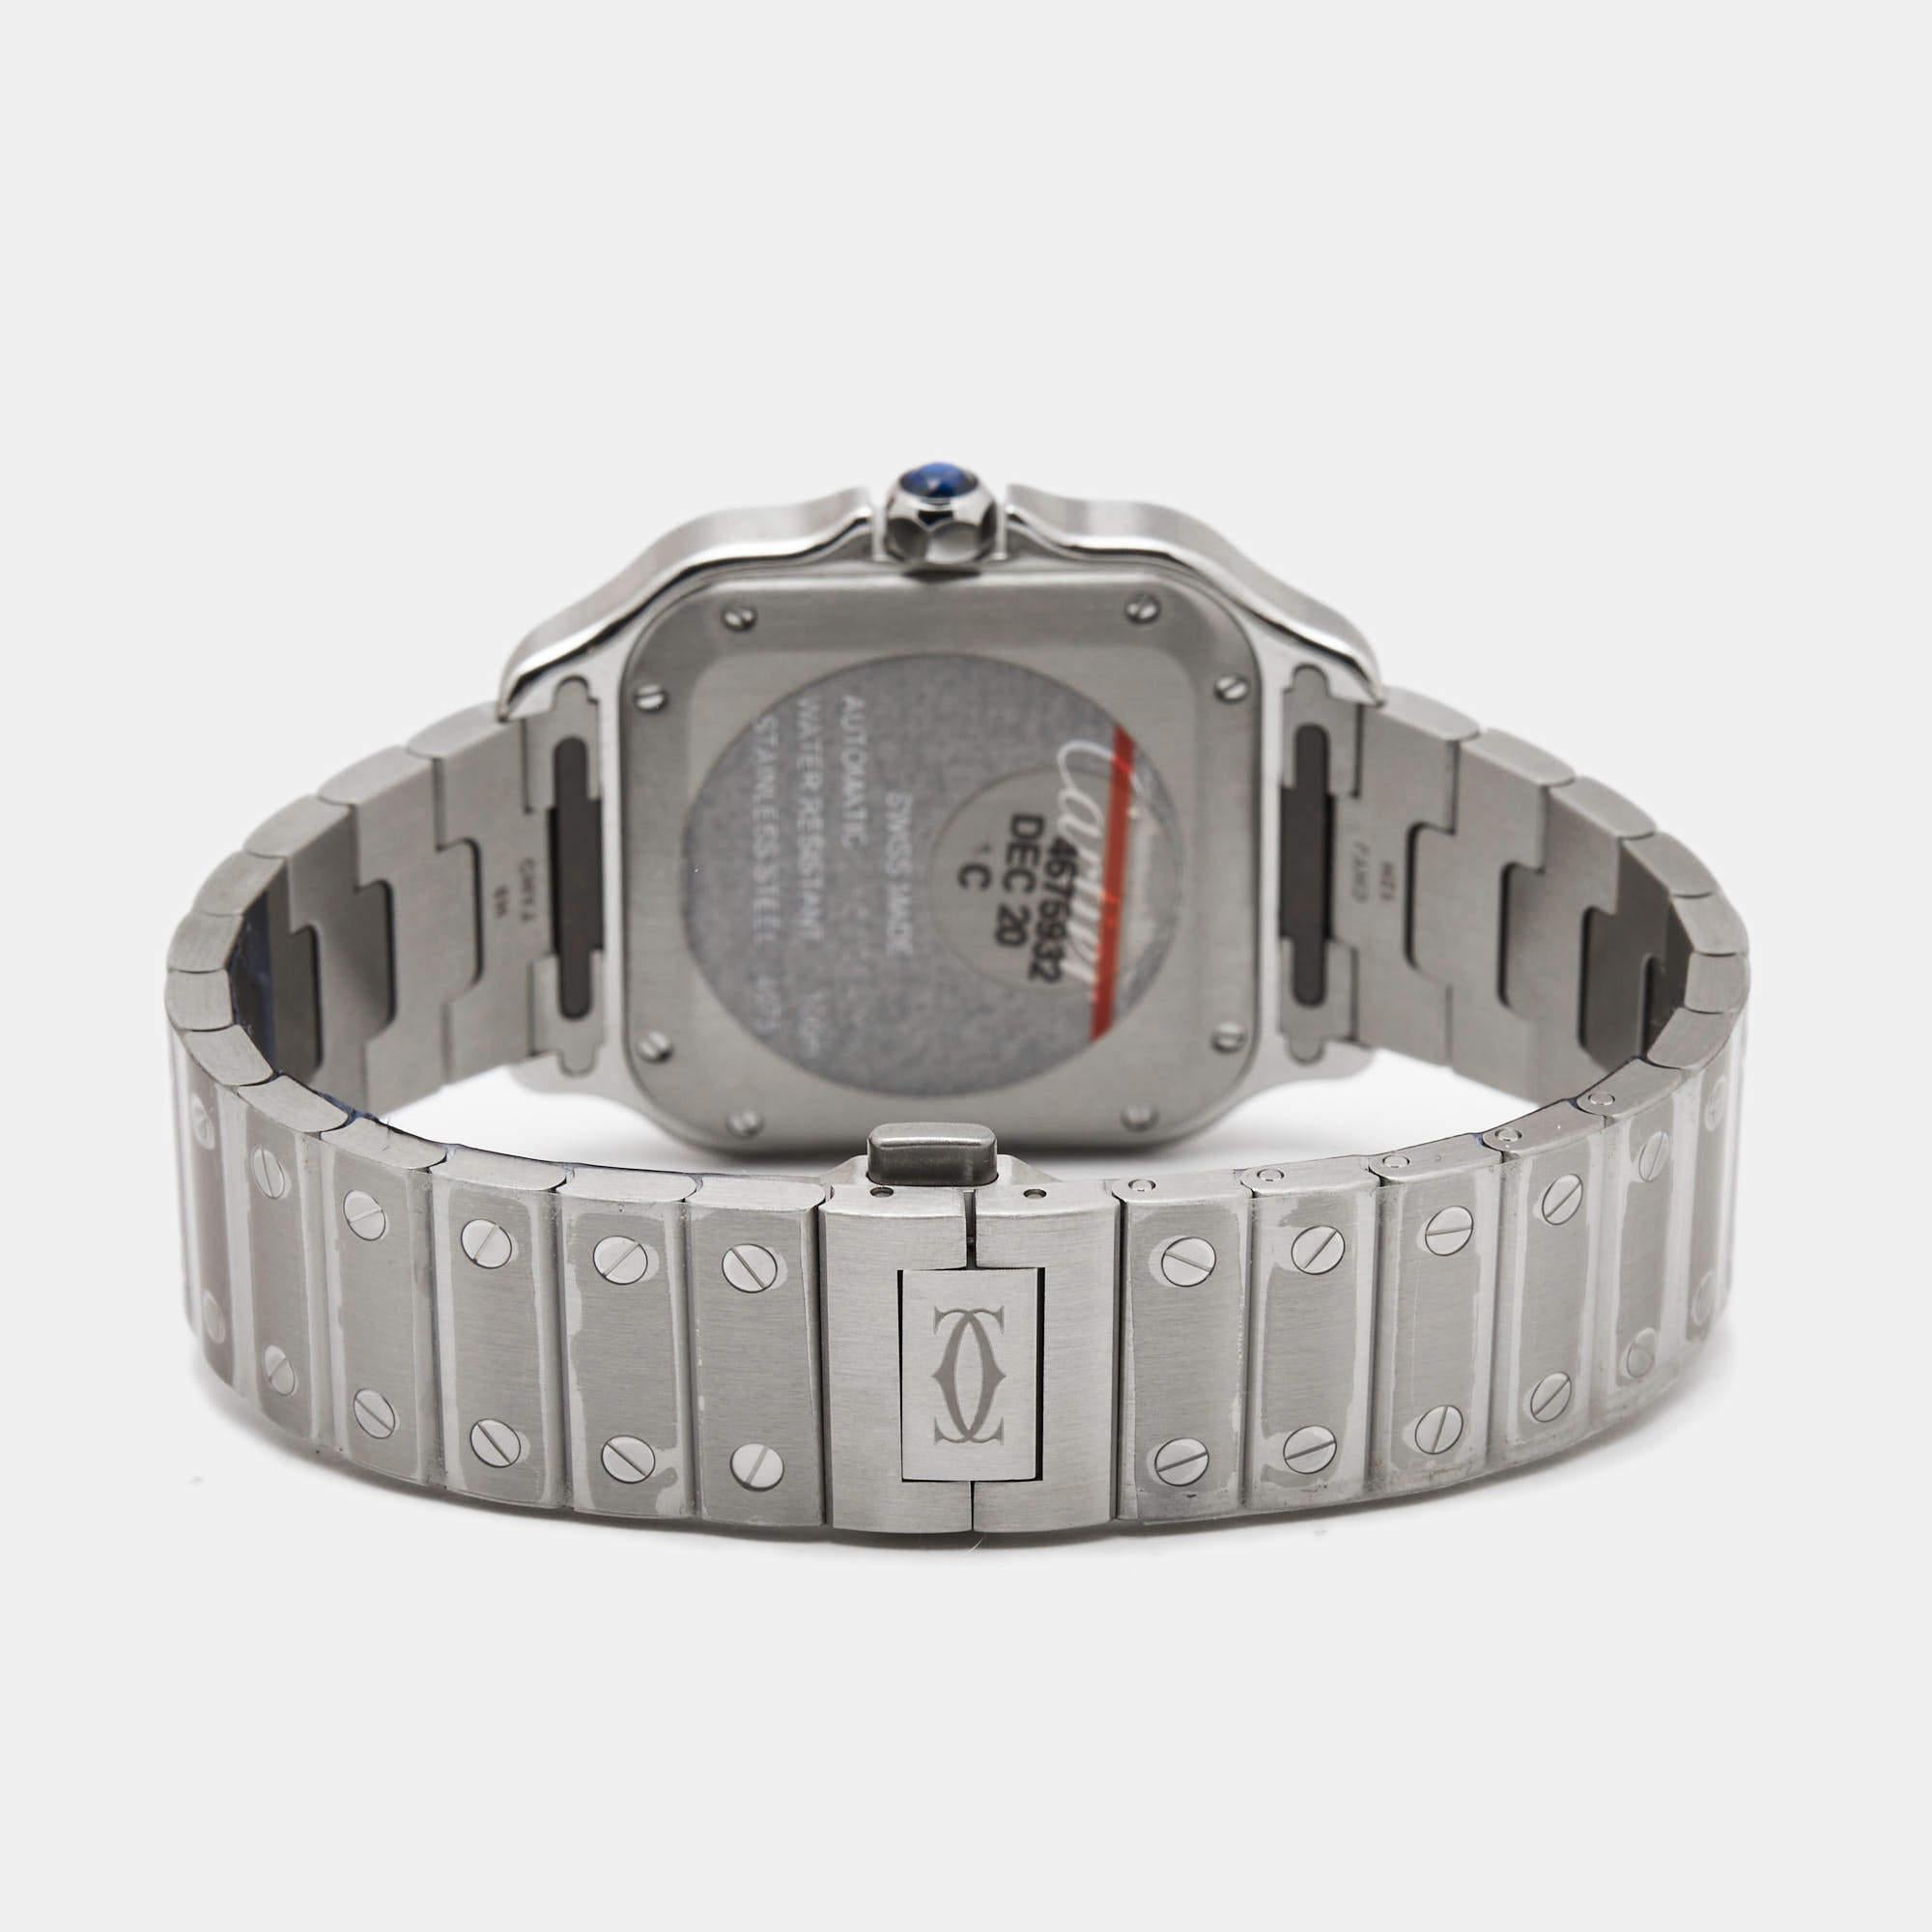 The Cartier Santos WSSA0010 watch is a refined blend of elegance and functionality. Its sleek stainless steel case houses a captivating silver-hued dial, adorned with Roman numeral hour markers and blued hands. The iconic square shape, inspired by